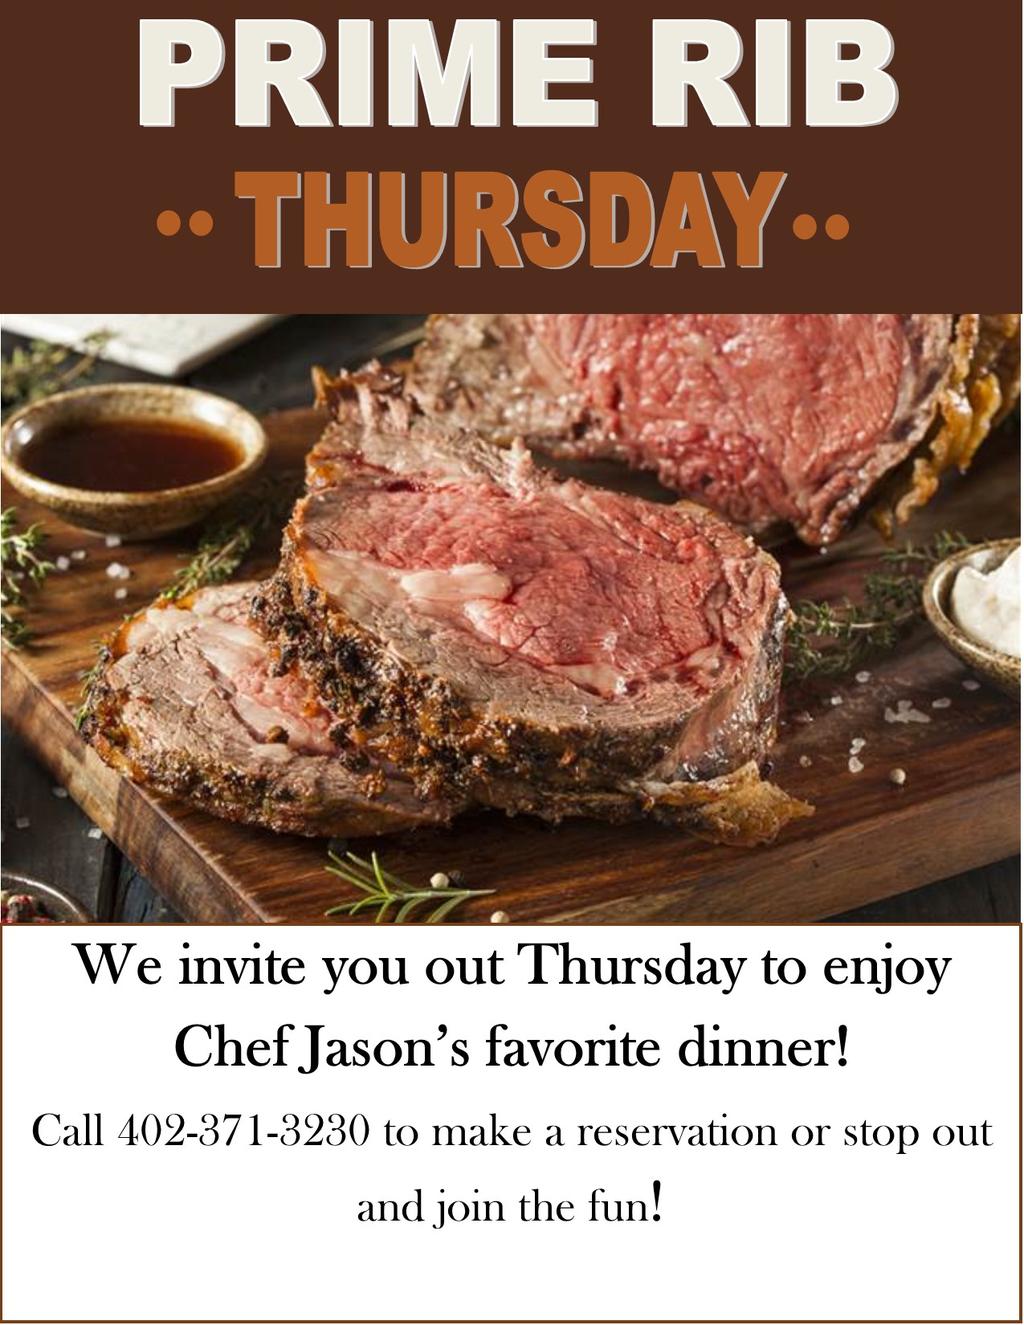 Join us this Thursday March 8 th for Prime Rib Thursday!